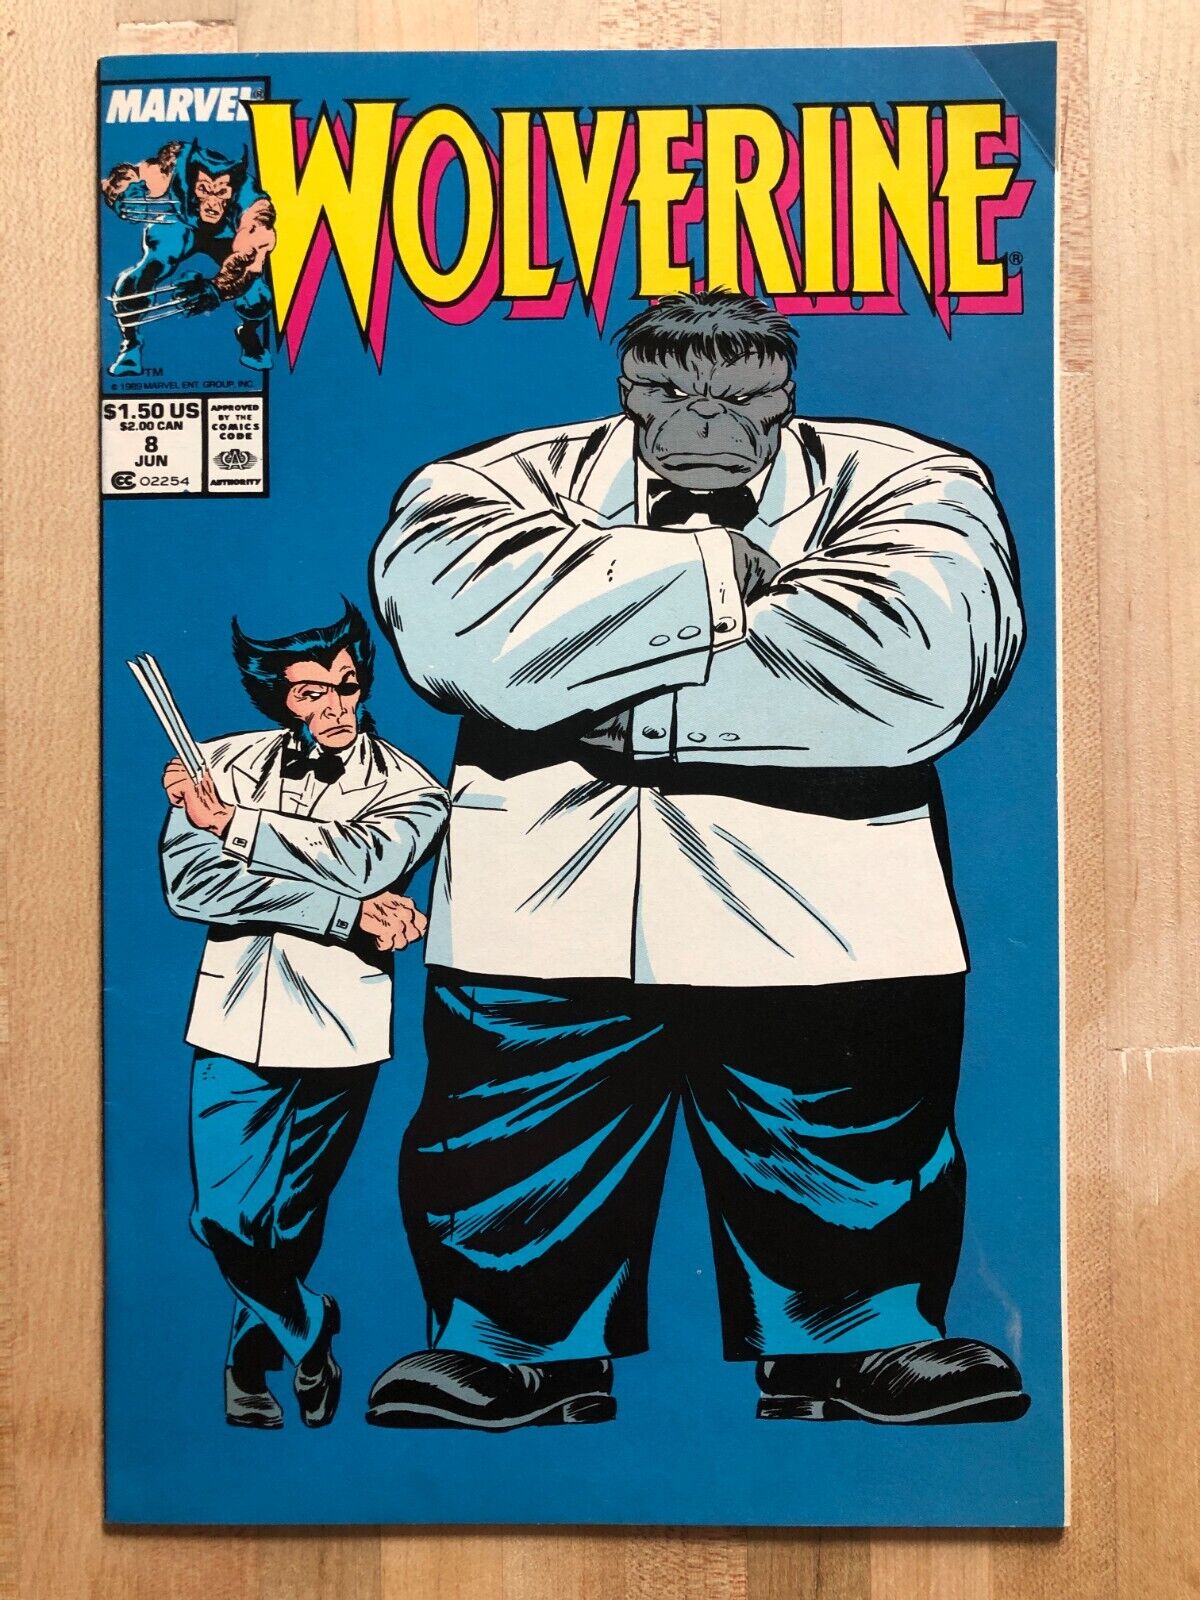 WOLVERINE #8 1989 MARVEL ICONIC BUSCEMA JOE FIX IT COVER ; LIEFELD BACK COVER